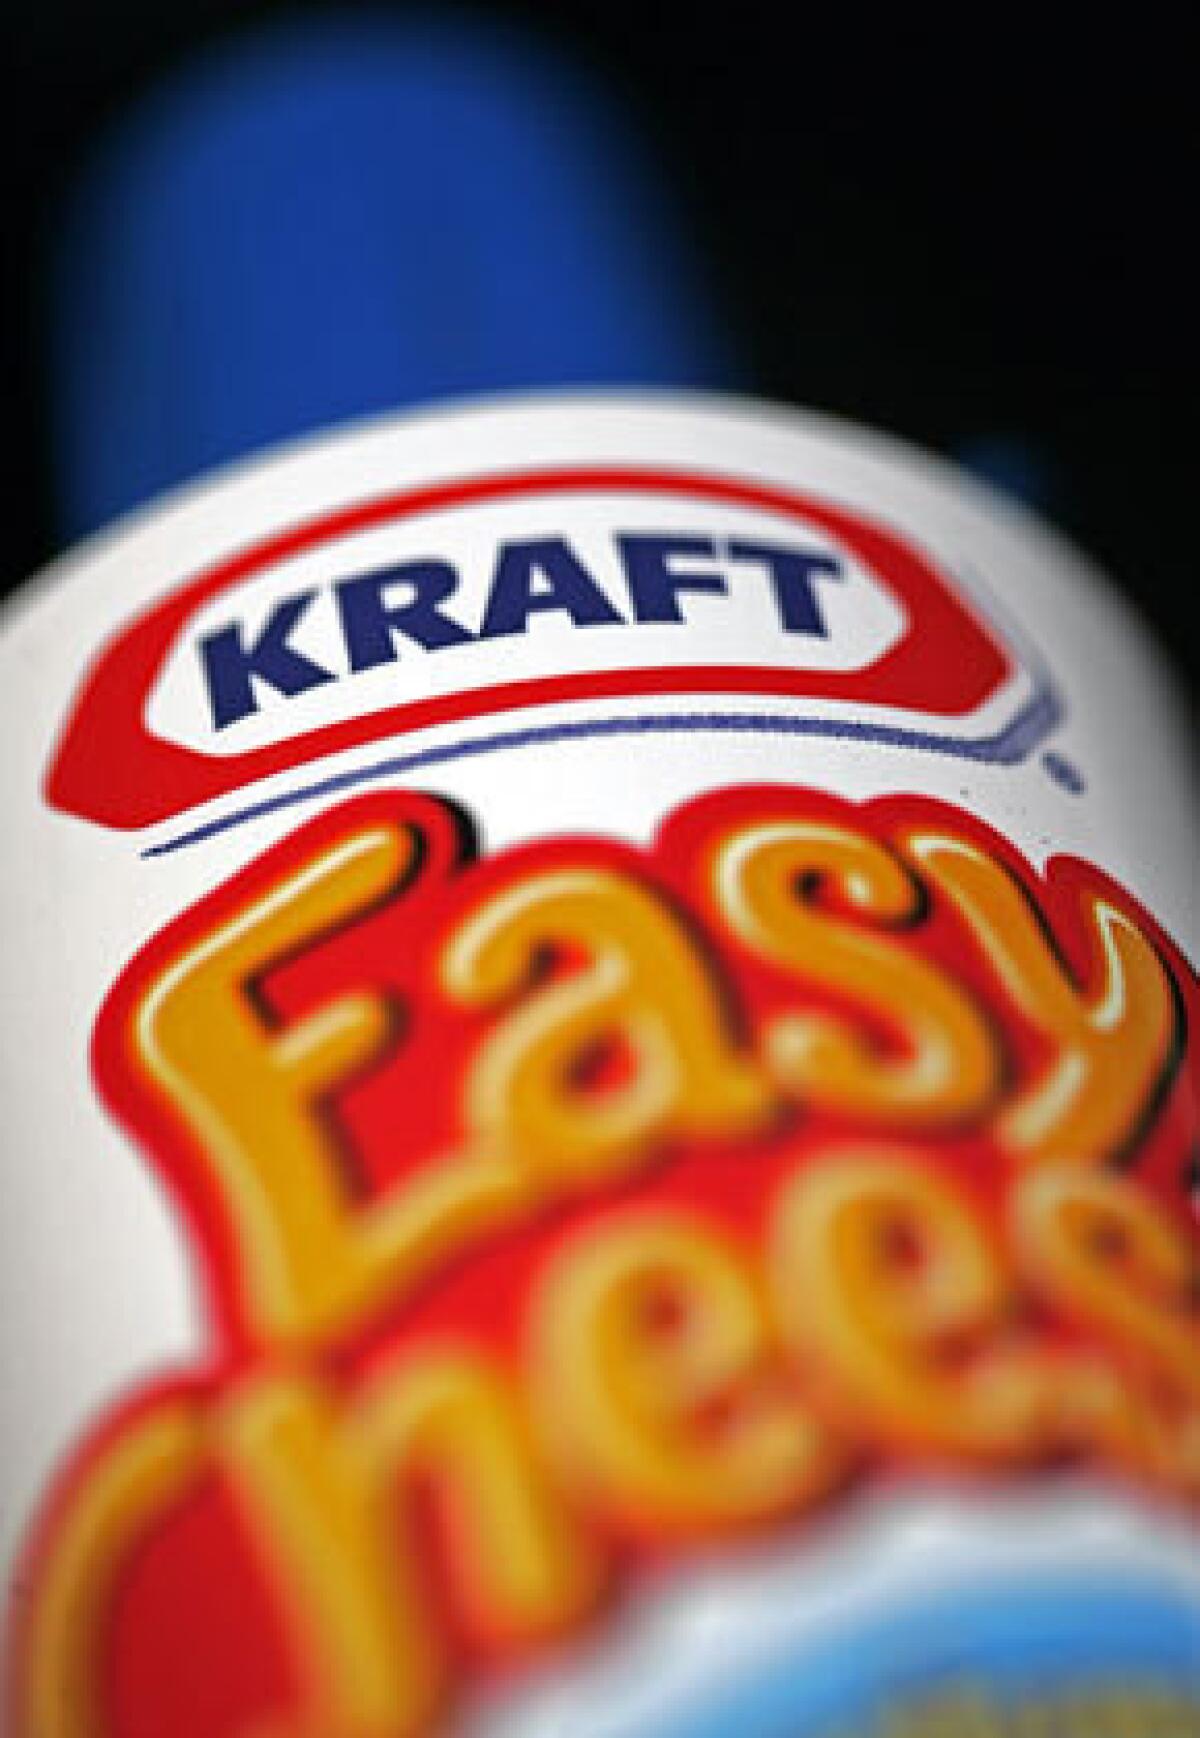 A can of of Kraft Easy Cheese.